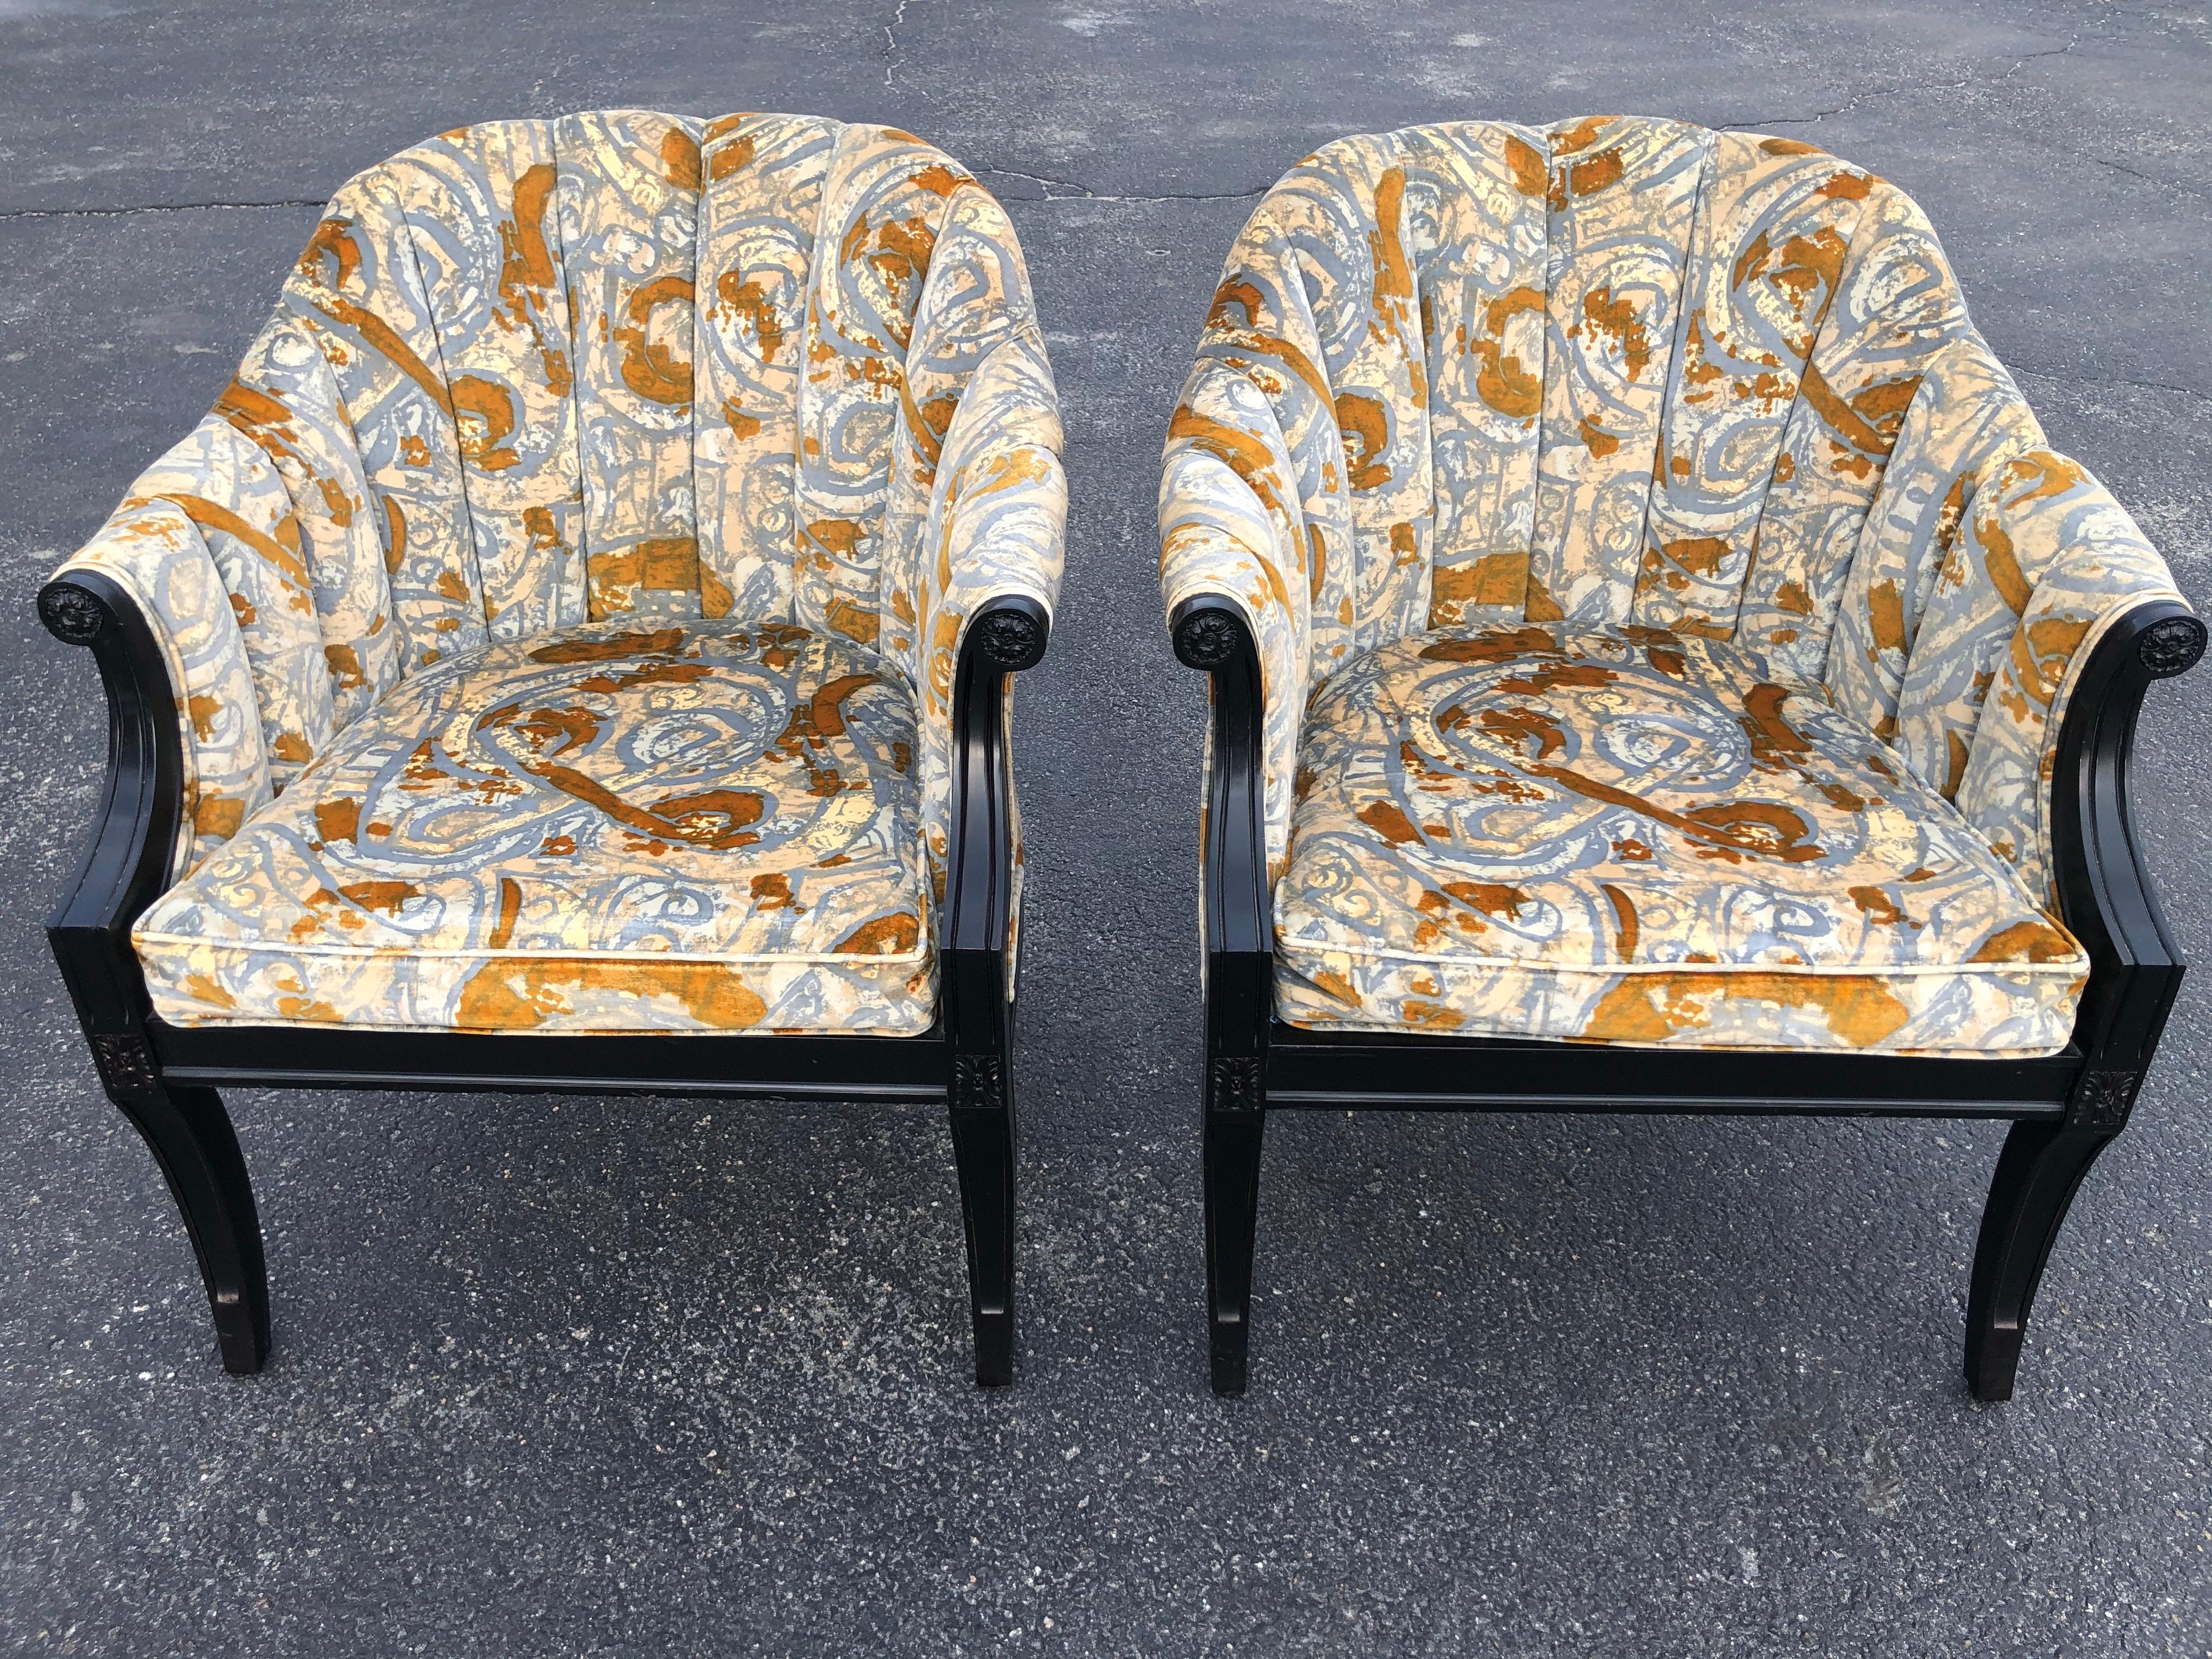 Pair of Hollywood Regency velvet chairs. Dramatic black wooden trim with what we believe to be Jack Lenor Larsen velvet upholstery. Gray blue caramel and off white tones make up this comnpostion. No need to recover. In very good condition.